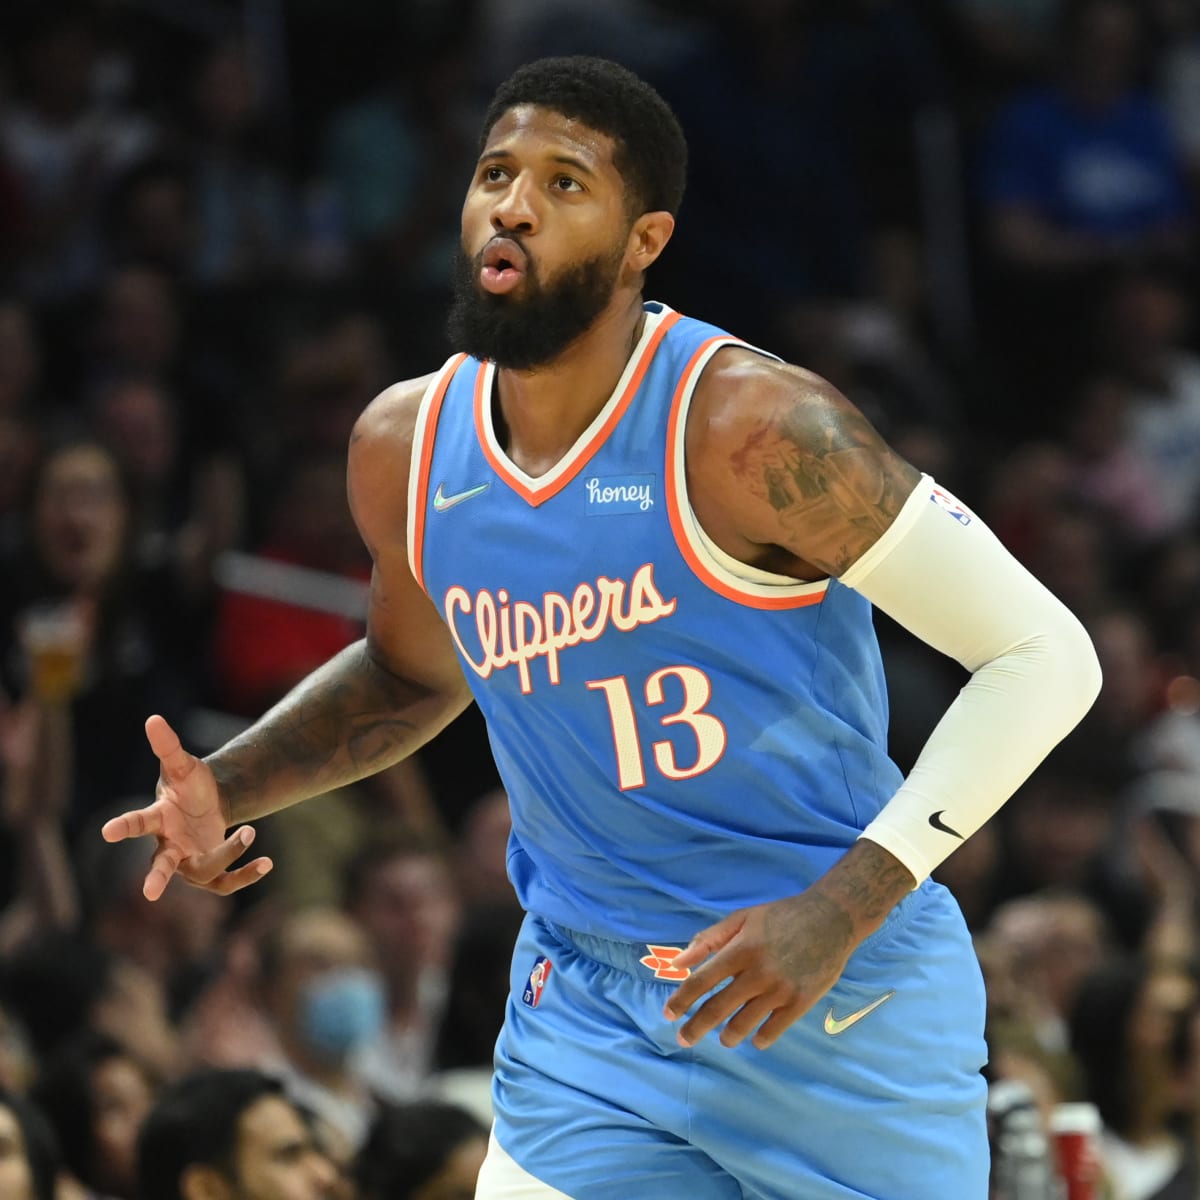 Paul George nearly a lock to be an All-Star starter